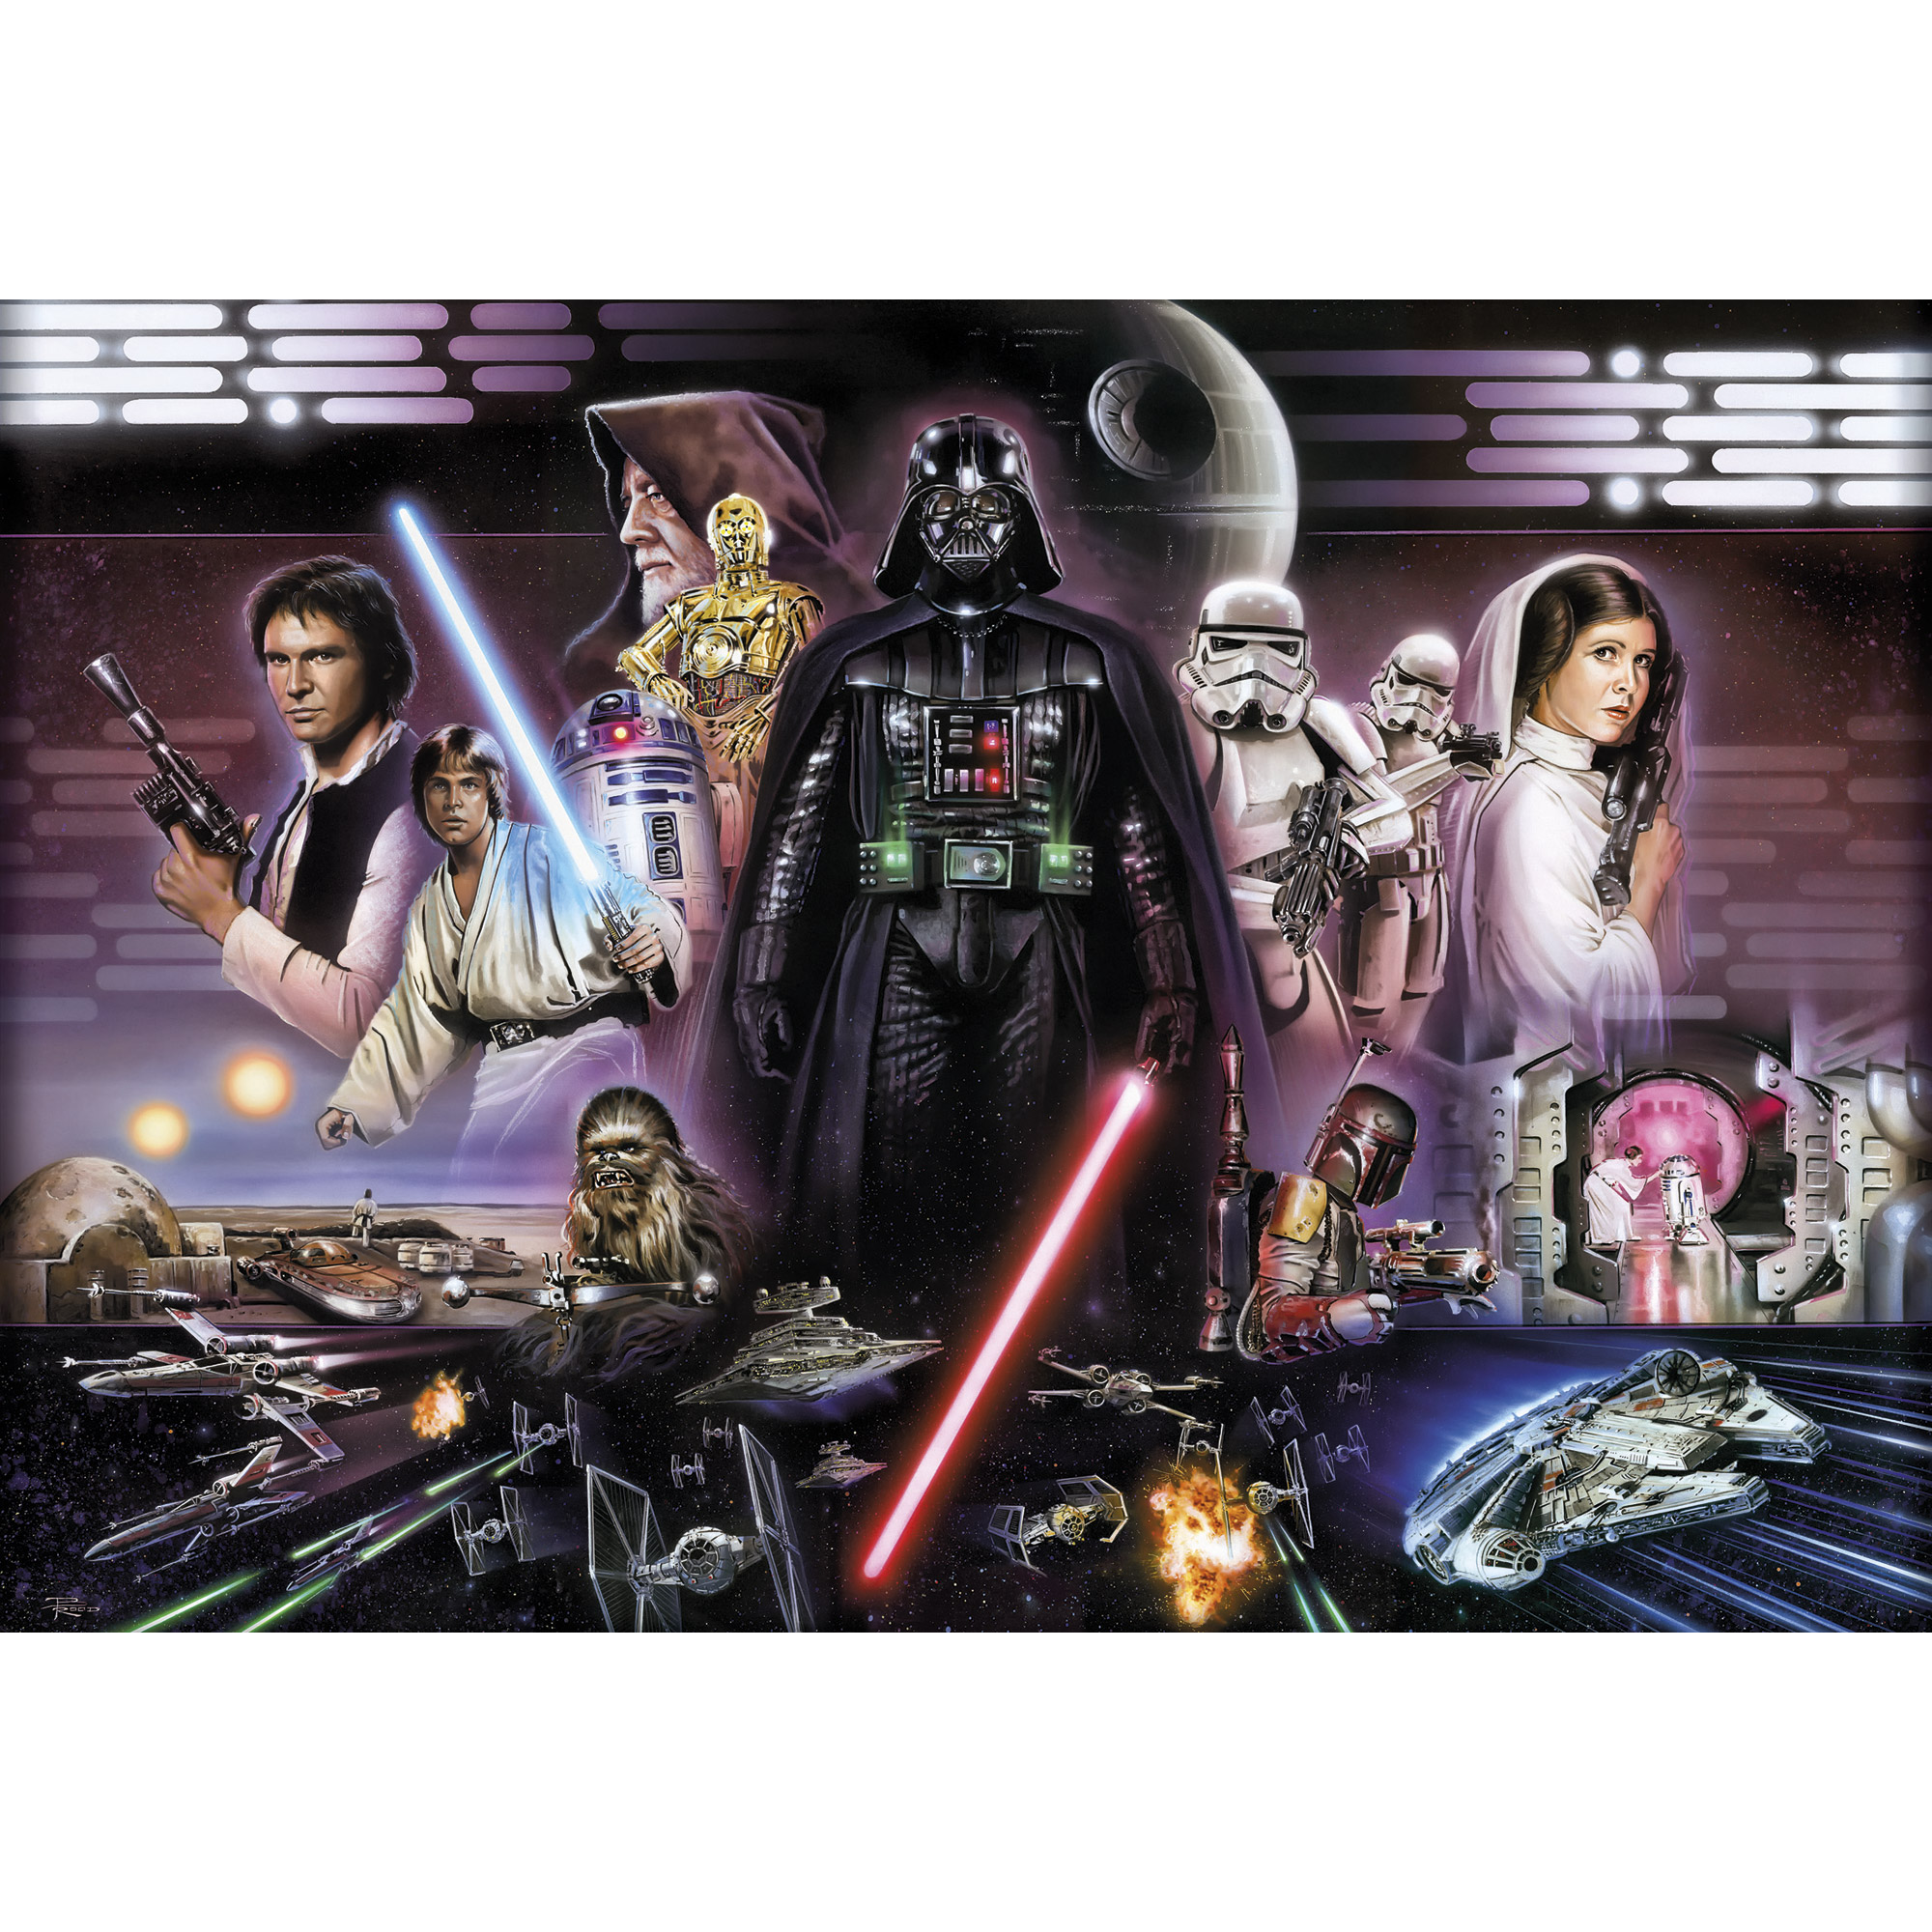 Fototapete 'Star Wars Darth Vader Collage' 368 x 254 cm + product picture